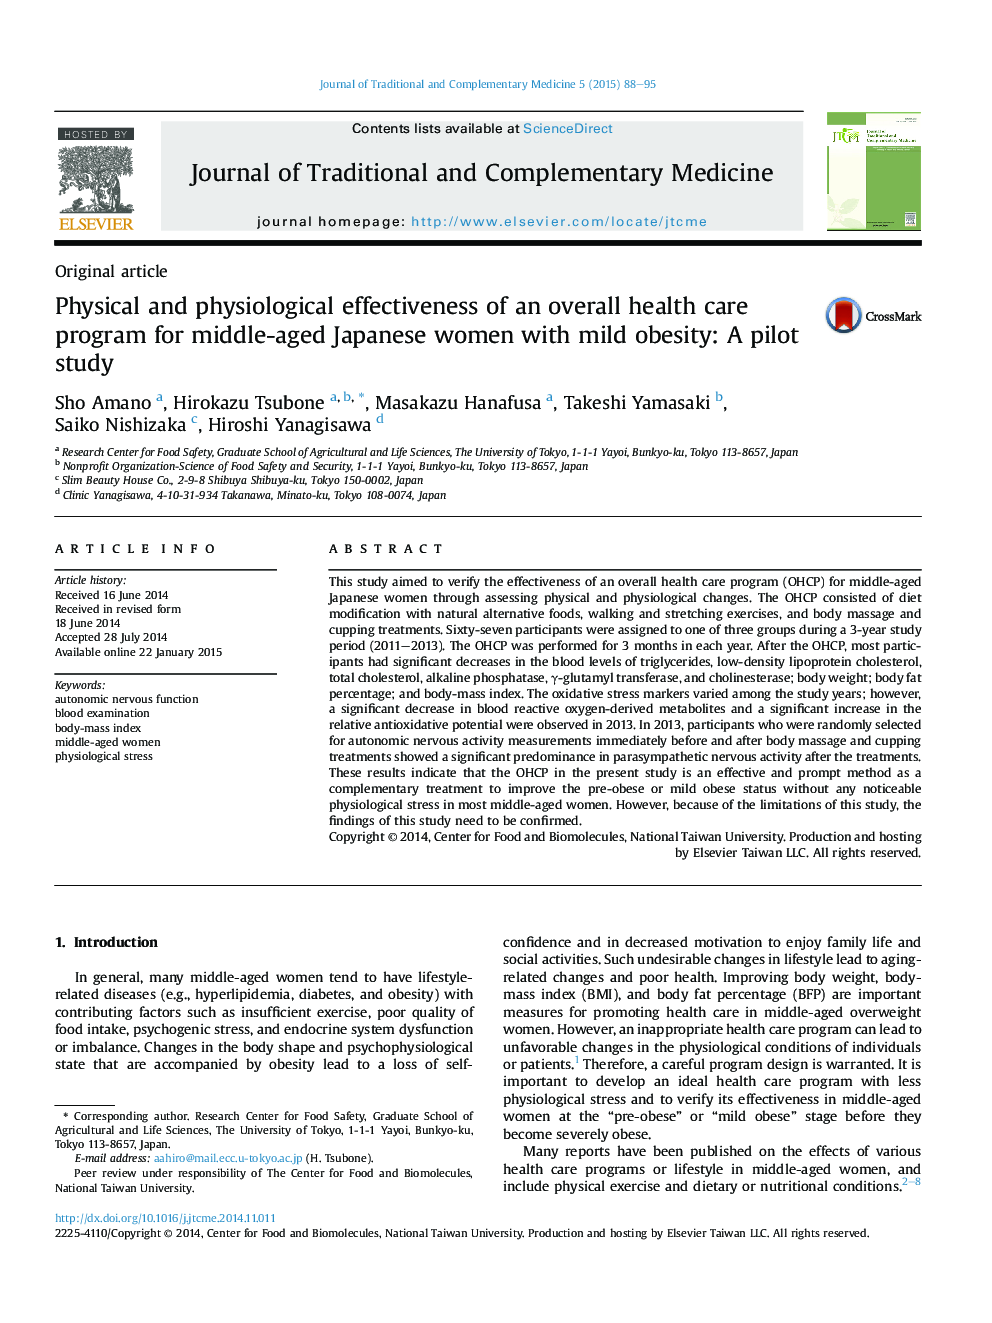 Physical and physiological effectiveness of an overall health care program for middle-aged Japanese women with mild obesity: A pilot study 